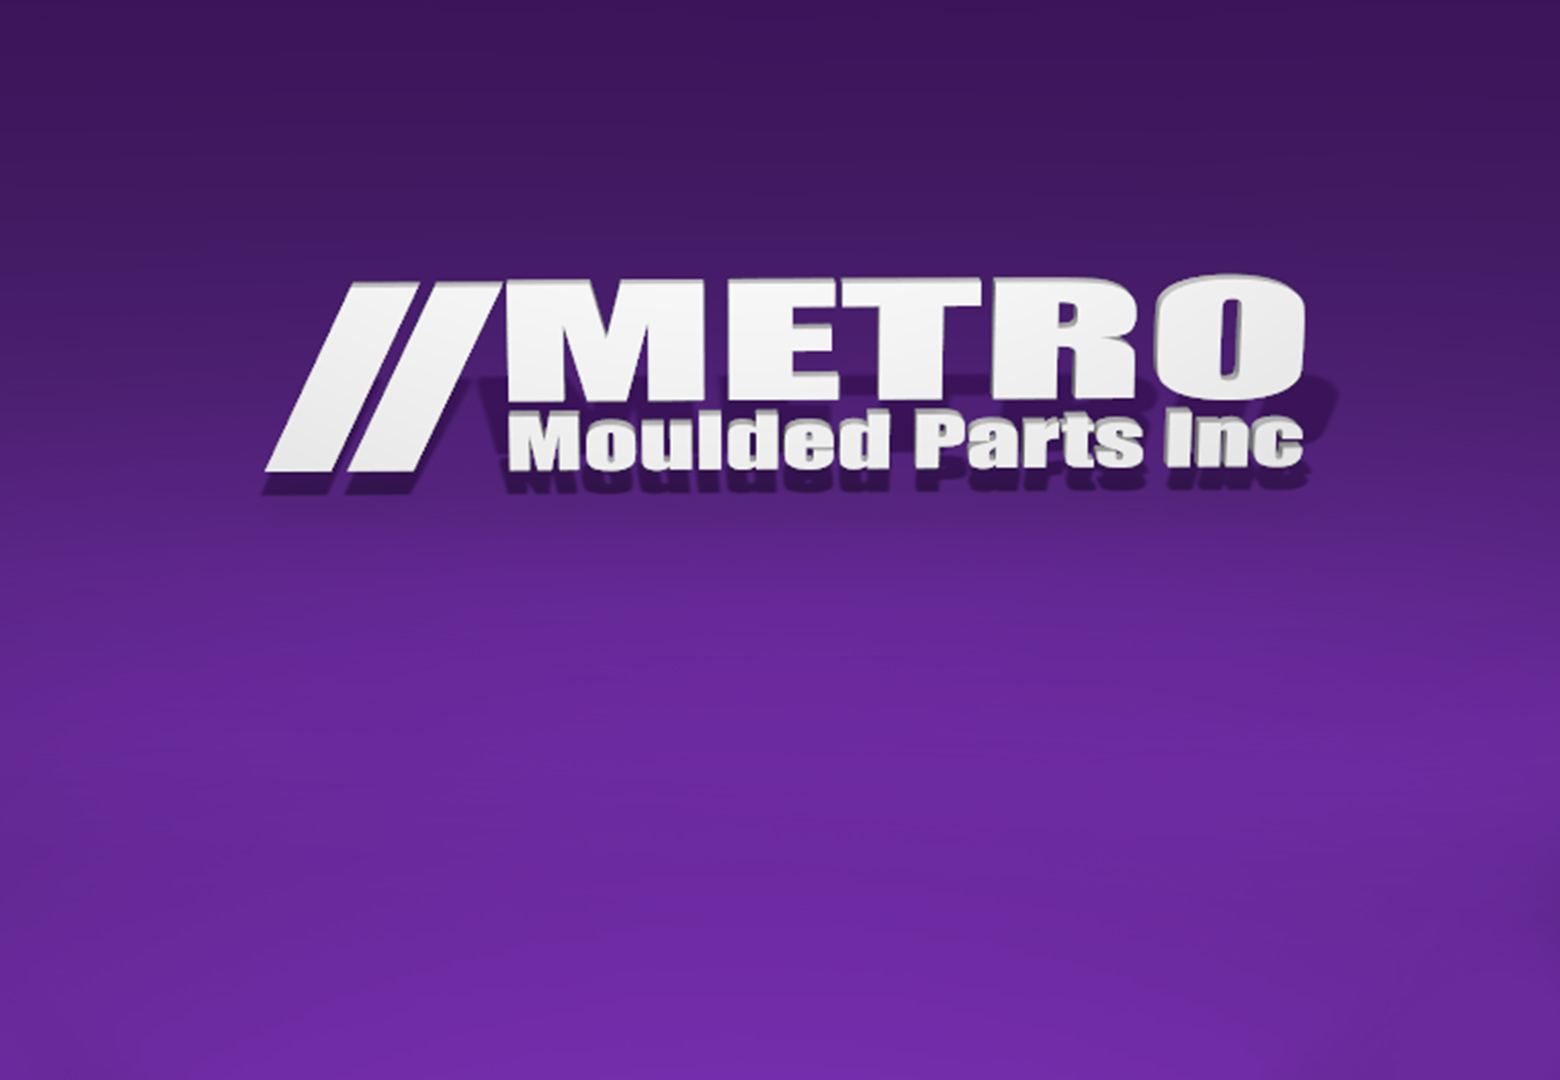 Metro Moulded LM 90-R SUPERsoft Door Seal Metro Moulded Parts Inc. 